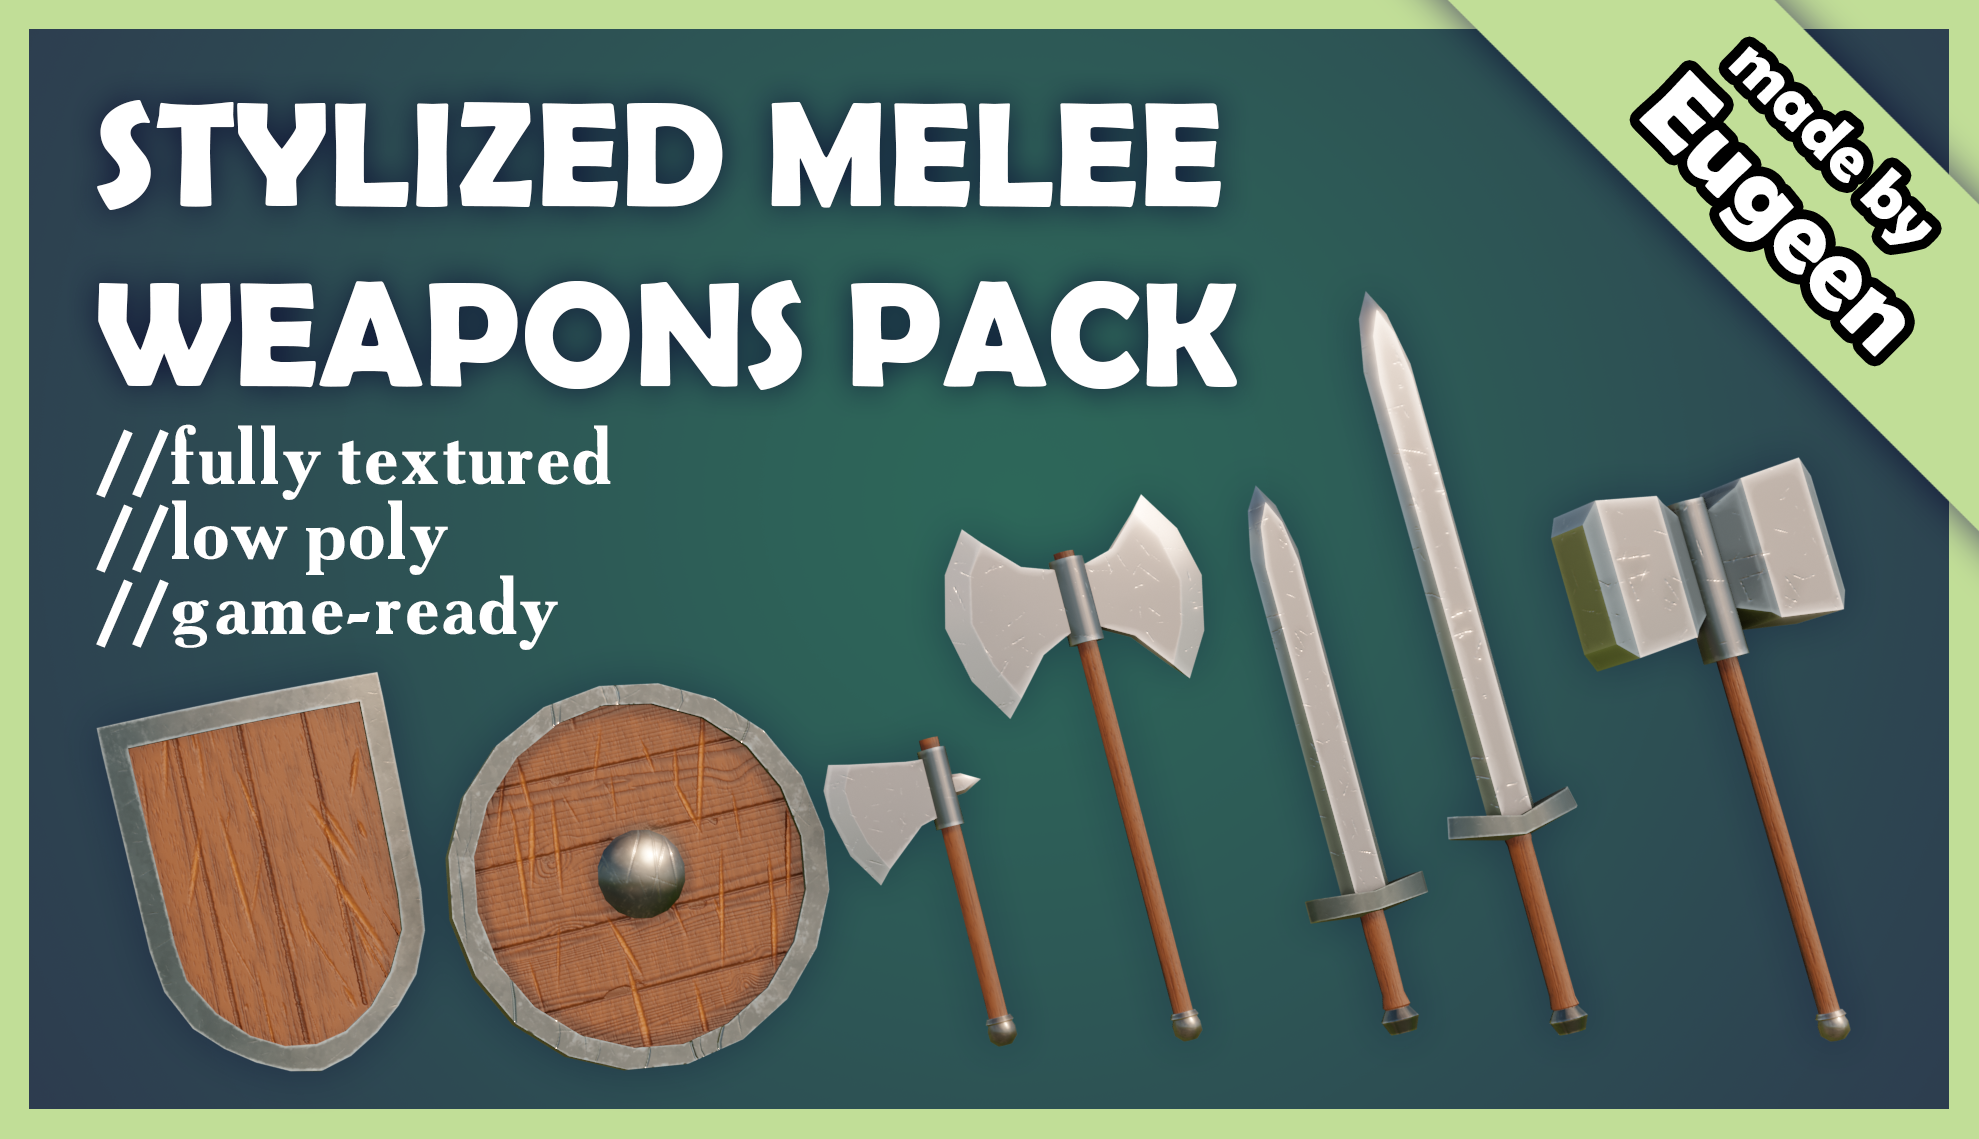 Stylized Melee Weapons Pack v1